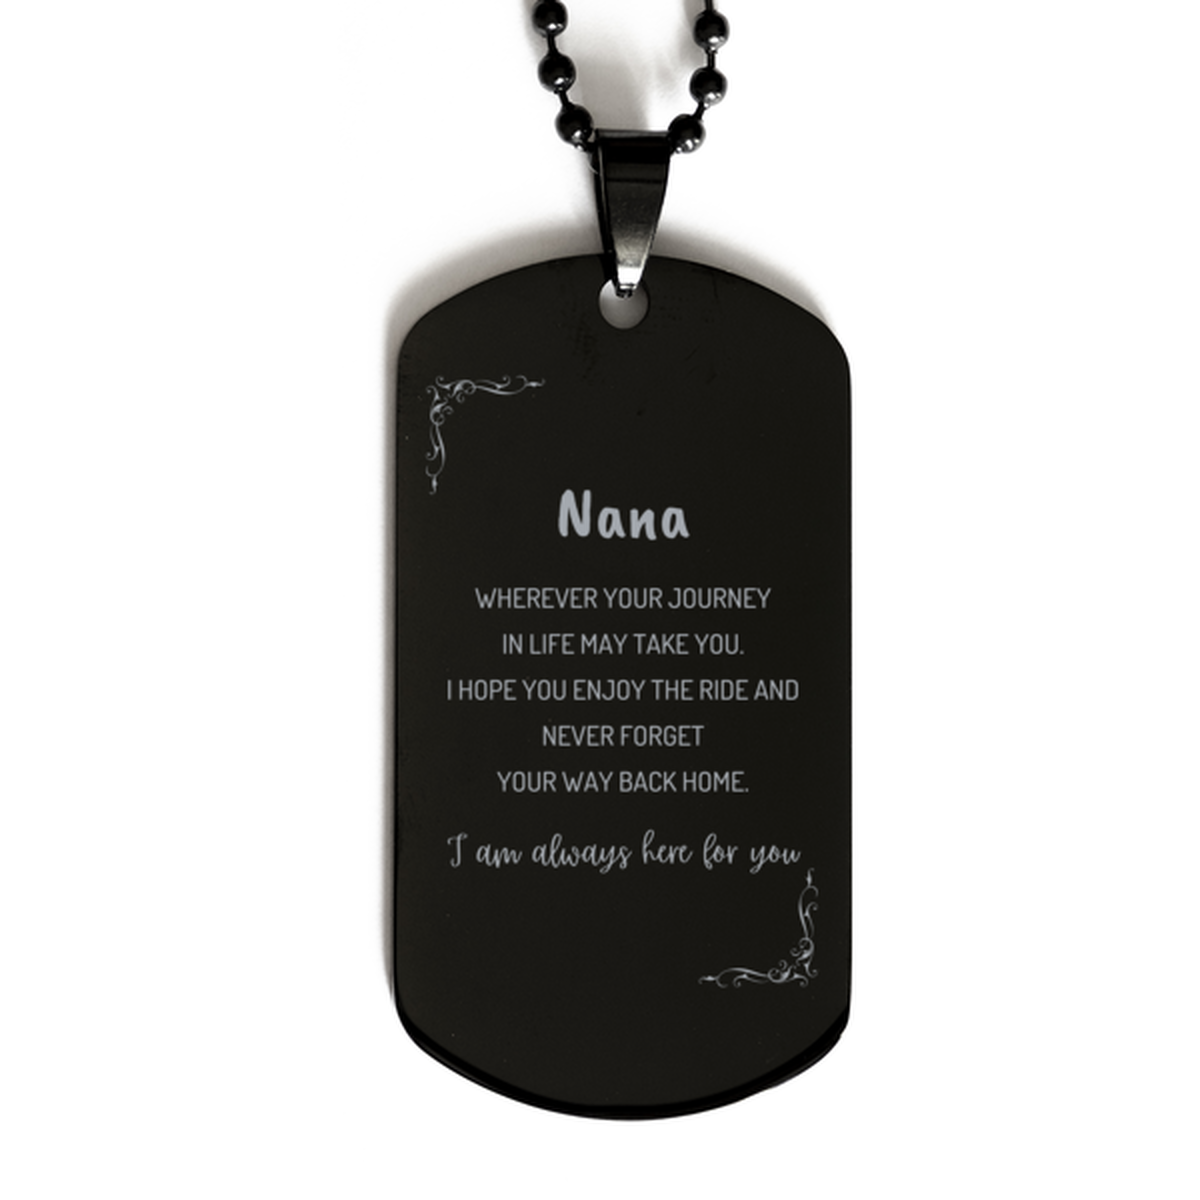 Nana wherever your journey in life may take you, I am always here for you Nana Black Dog Tag, Awesome Christmas Gifts For Nana, Nana Birthday Gifts for Men Women Family Loved One